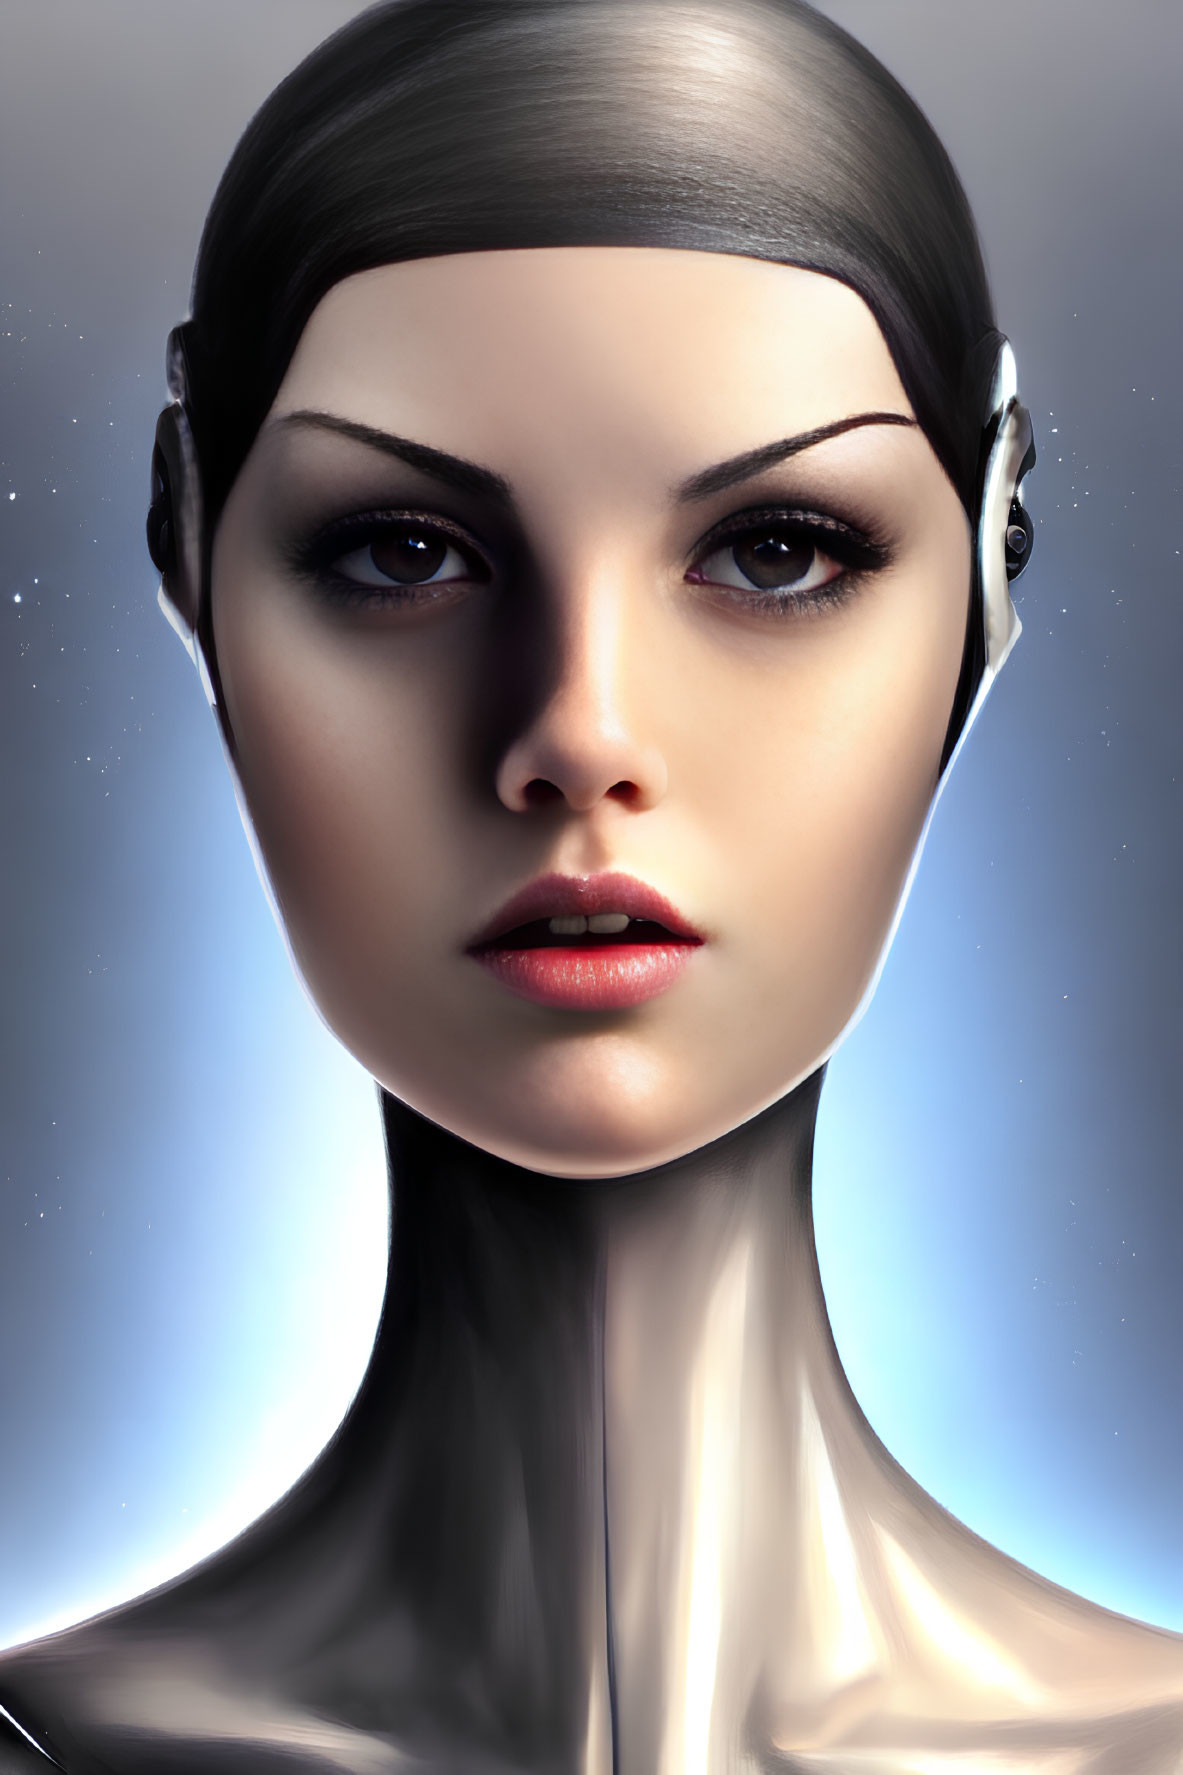 Female android portrait with metallic skin and earpiece-like technology